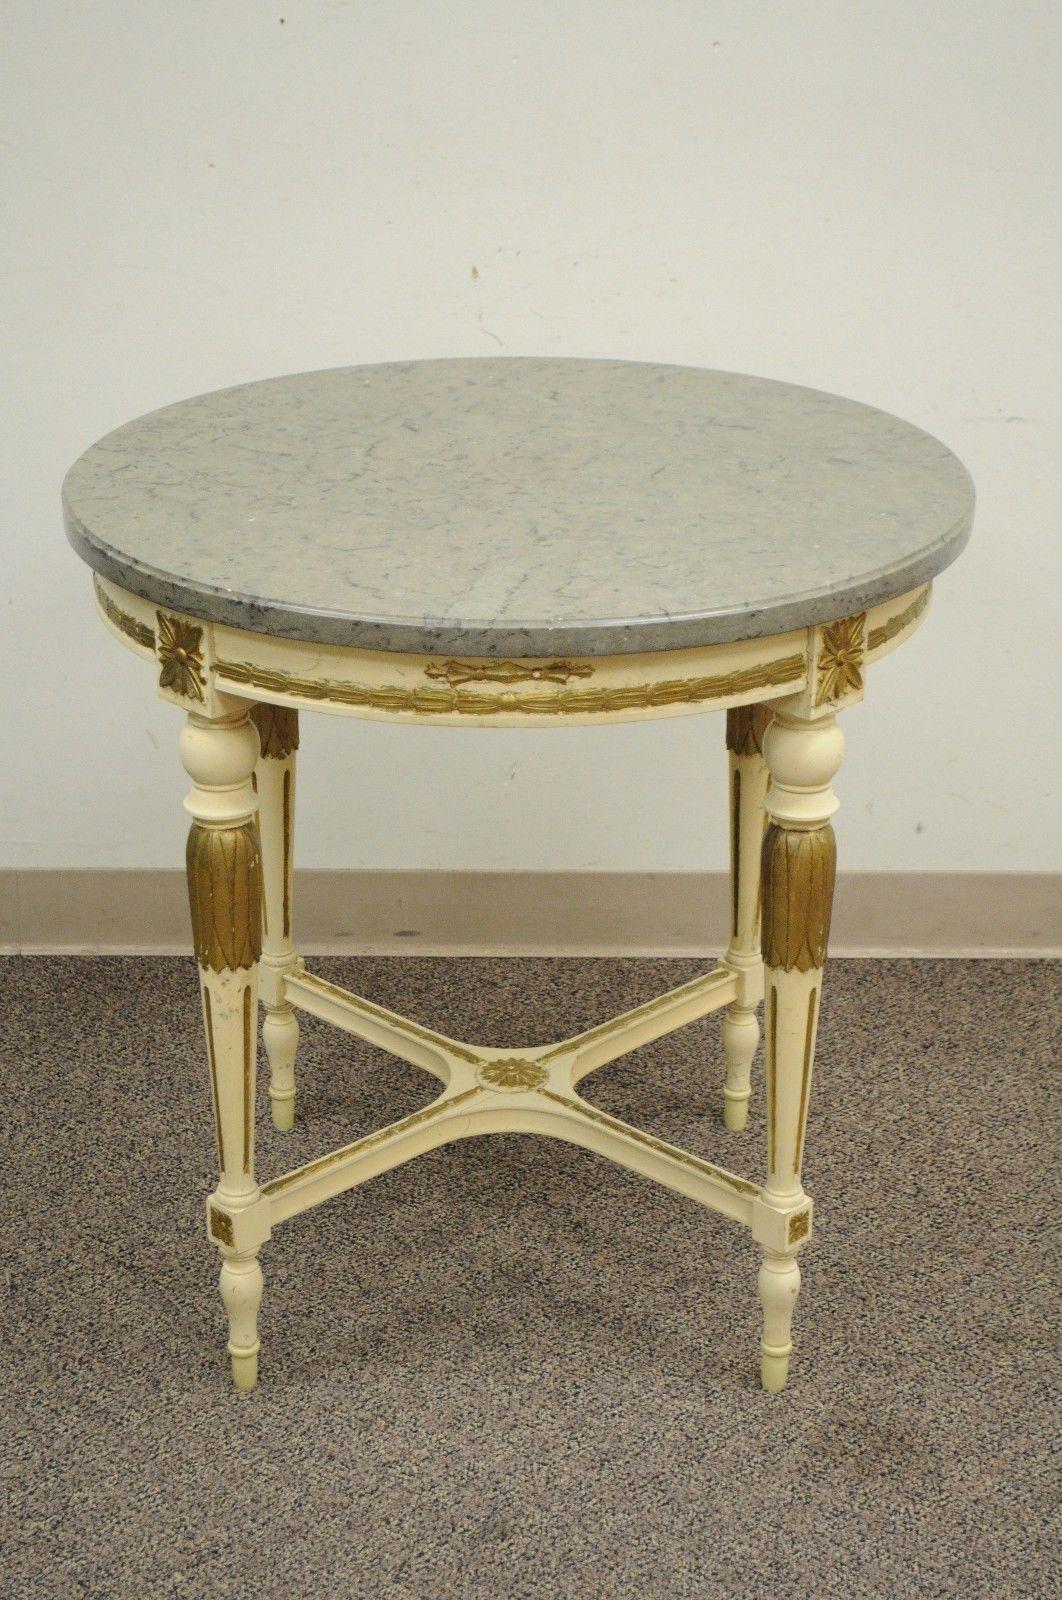 Vintage French Louis XV style round marble/granite top accent table. Item features solid wood frame, nicely carved details, cream and gold painted finish, tapered legs, stretcher base, grey stone top, very nice vintage item, great style and form,